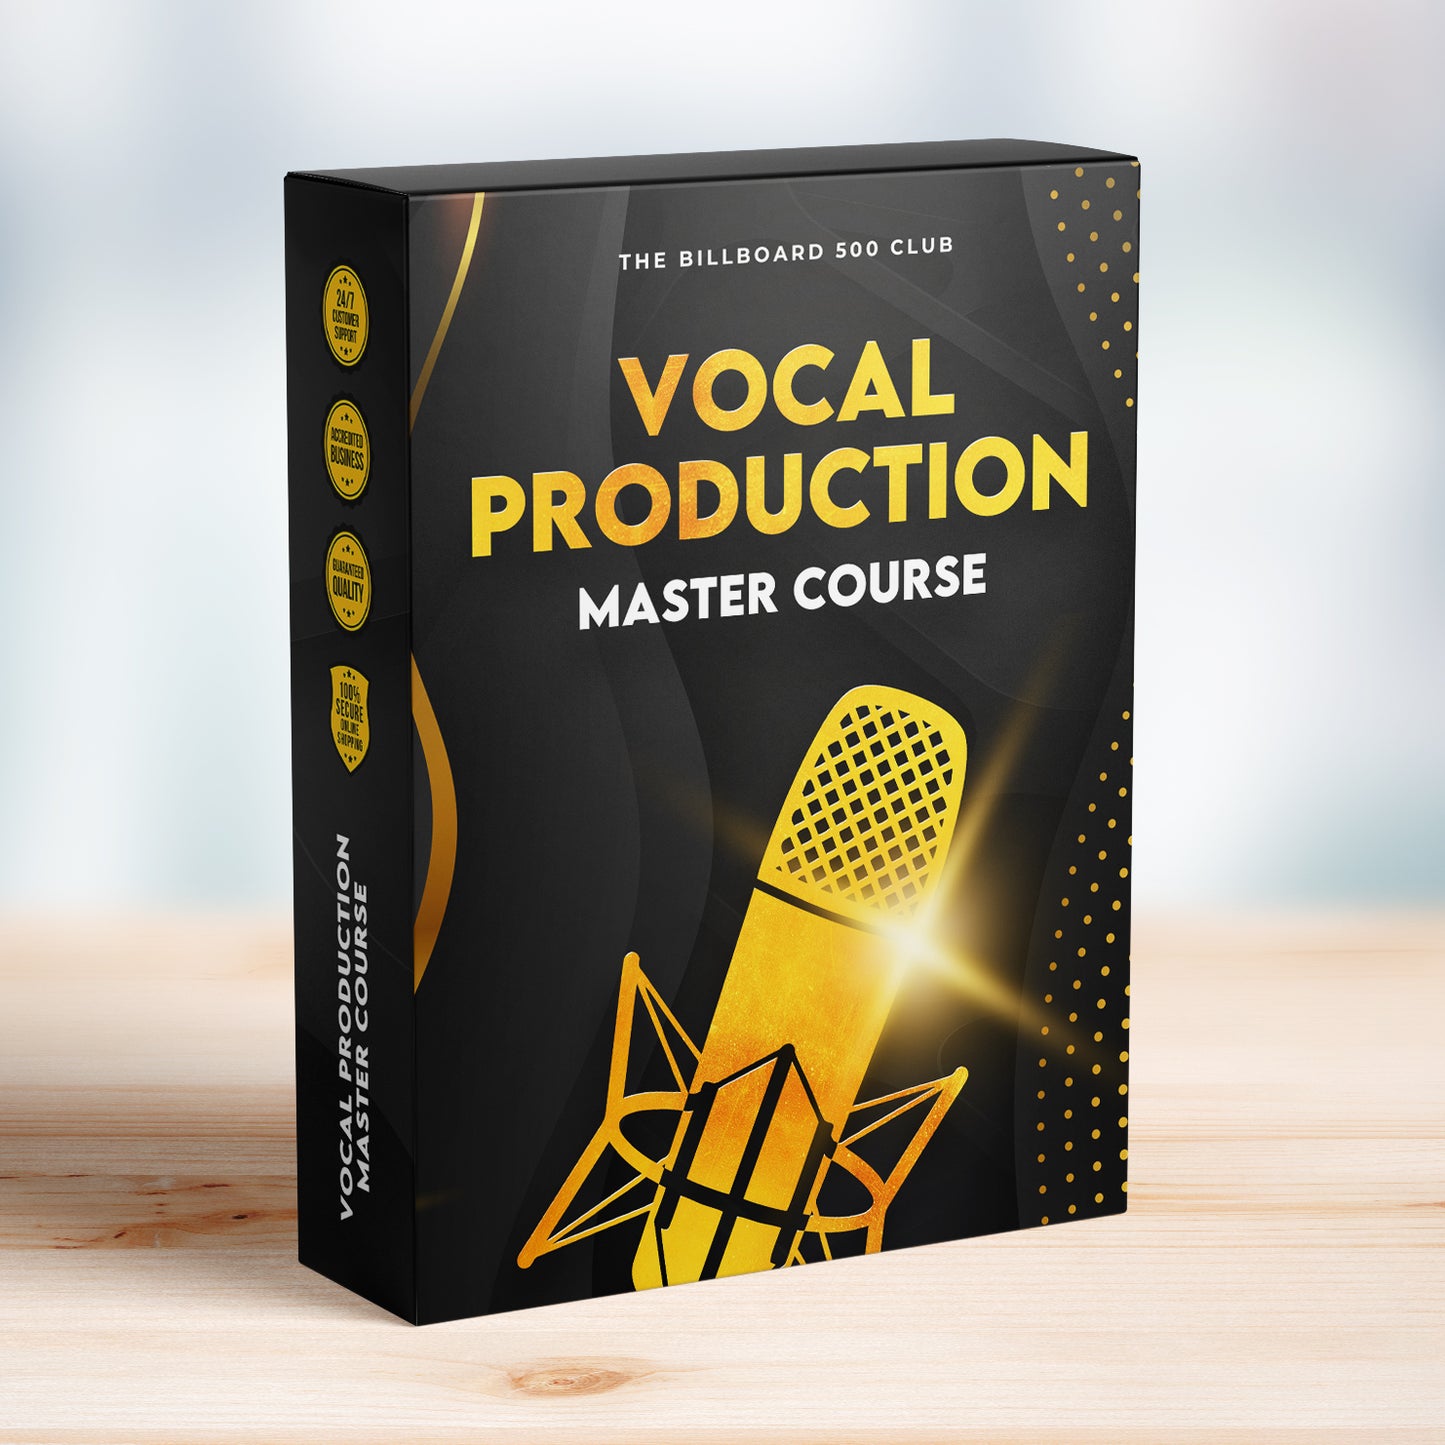 Vocal Production Master Course - The Billboard 500 Club